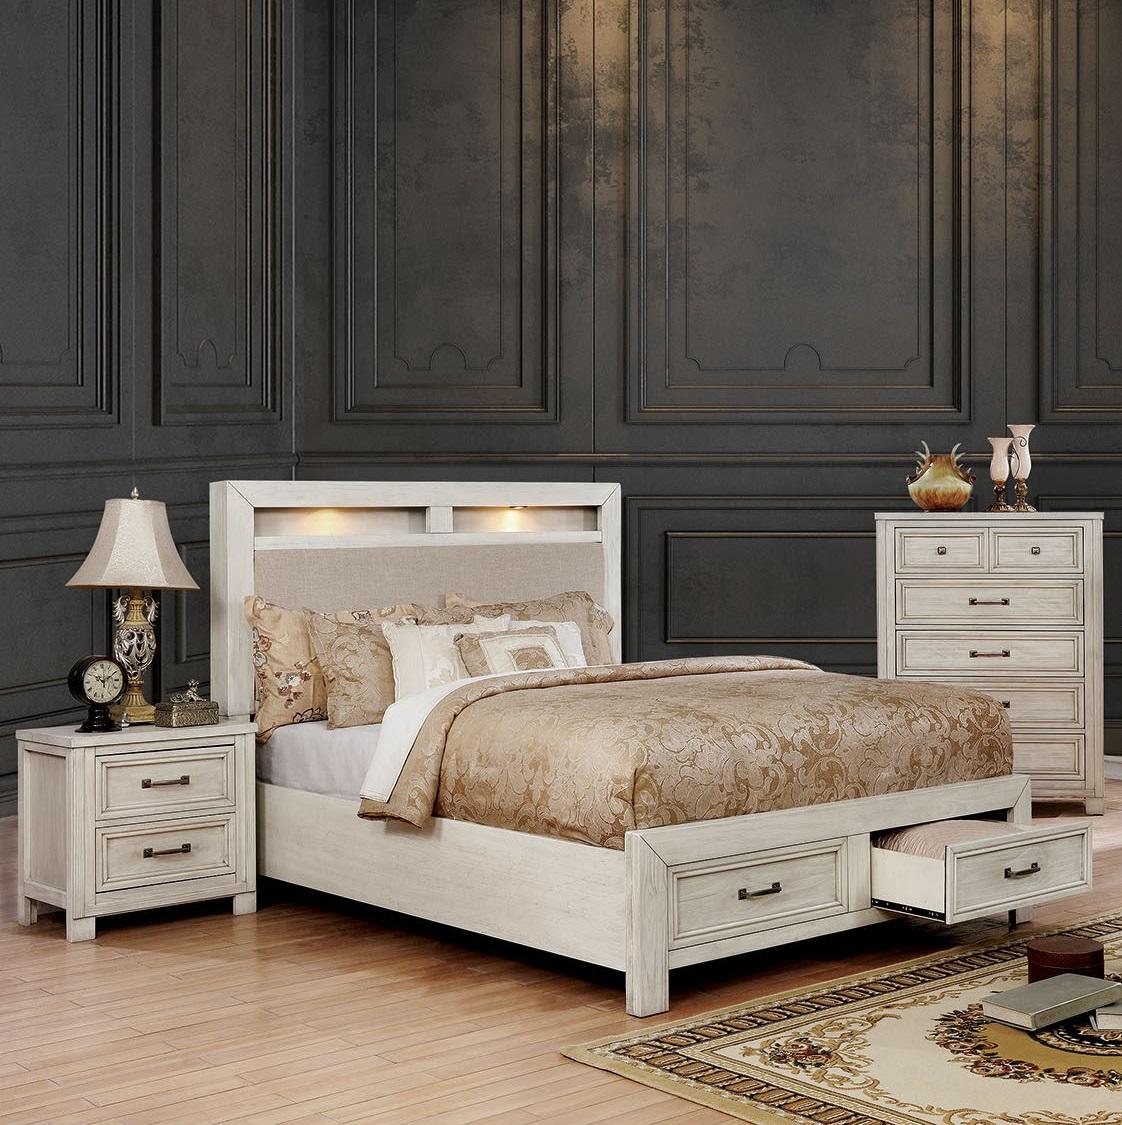 Transitional Storage Bedroom Set CM7365WH-Q-5PC Tywyn CM7365WH-Q-5PC in Antique White Fabric